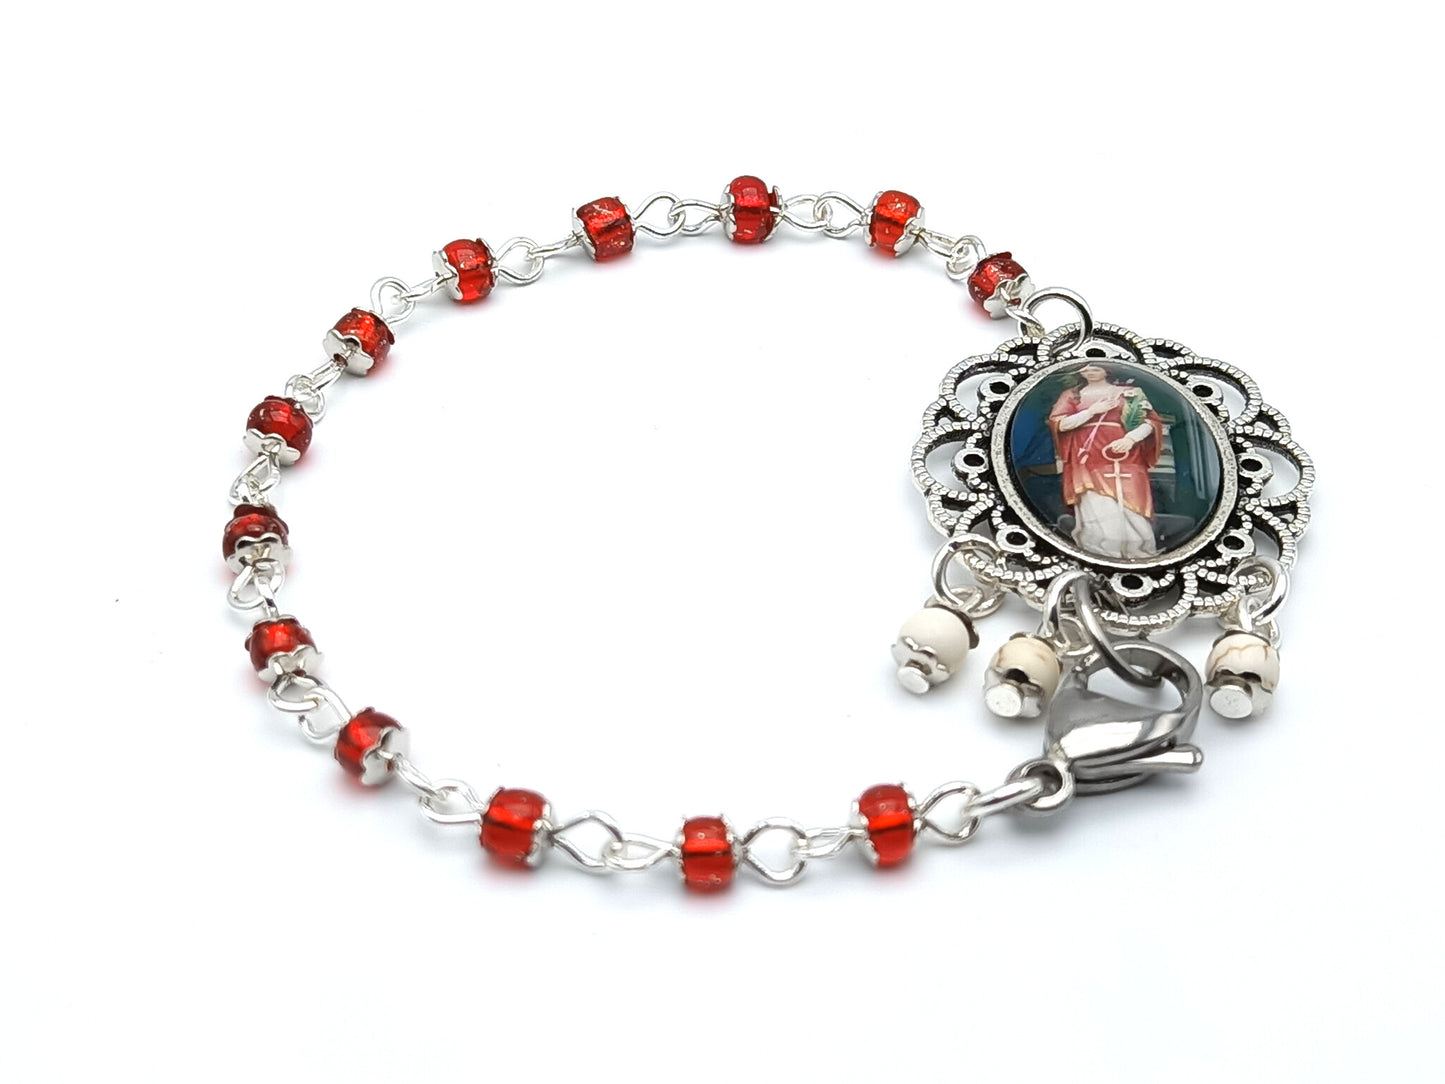 Saint Philomena unique rosary beads prayer chaplet bracelet with red glass beads and ornate centre medal.